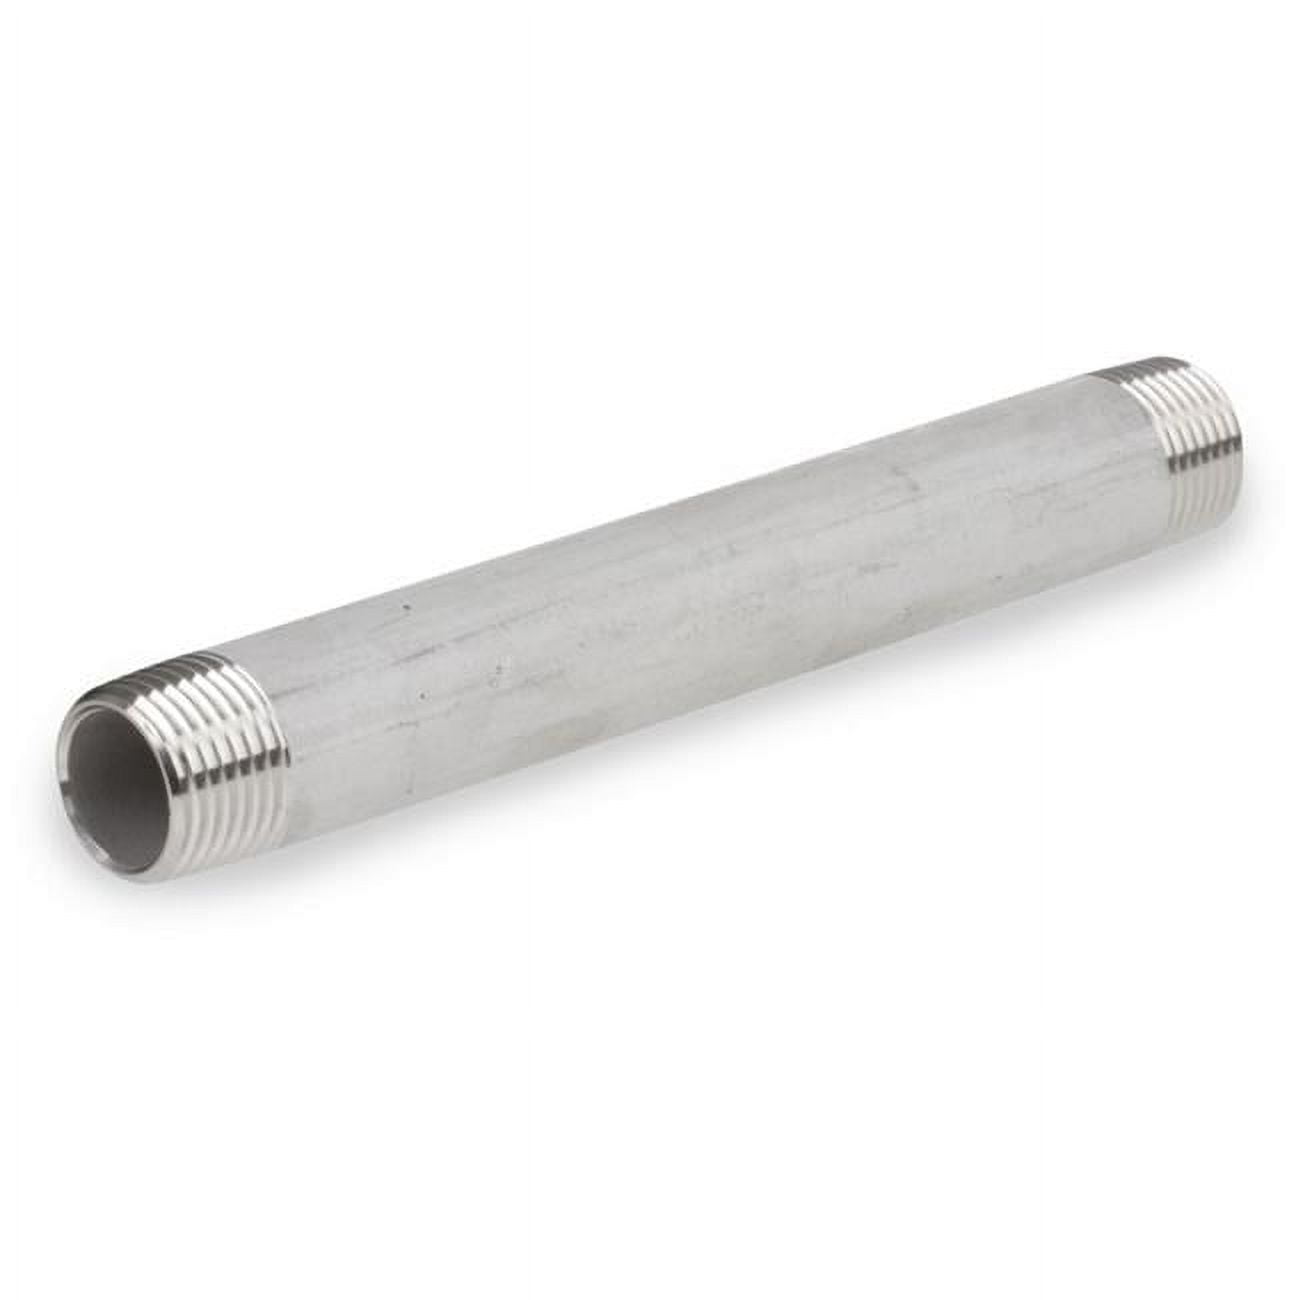 4868493 1.25 In. Mpt X 1.25 In. Dia. X 5 In. Mpt Stainless Steel Pipe Nipple